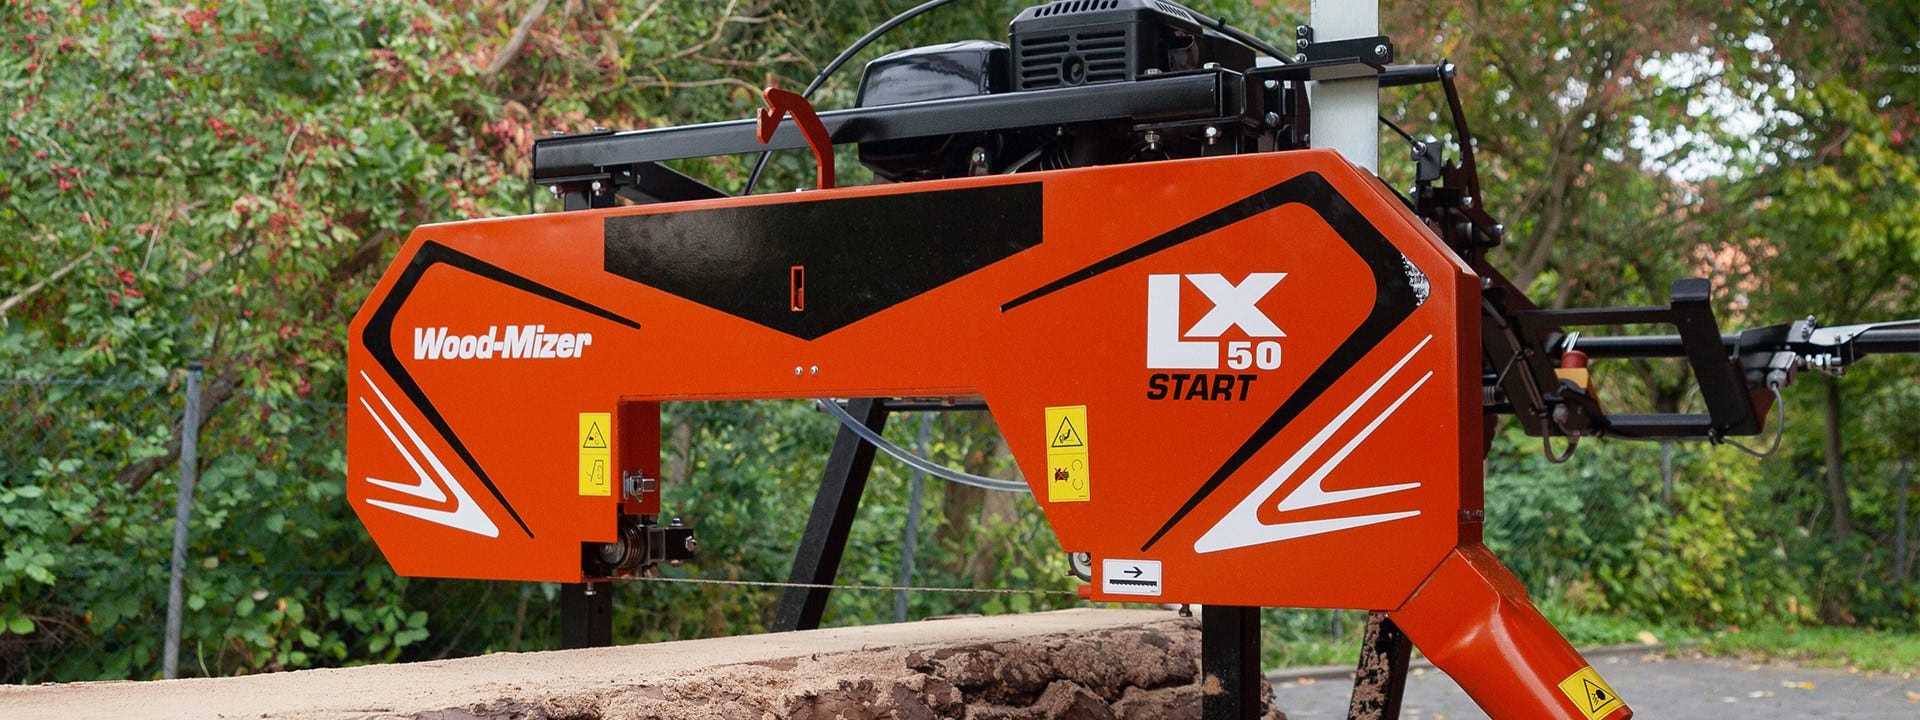 Wood-Mizer Introduces Entry-Level LX50START Sawmill for Sawing Logs to Timber Economically  